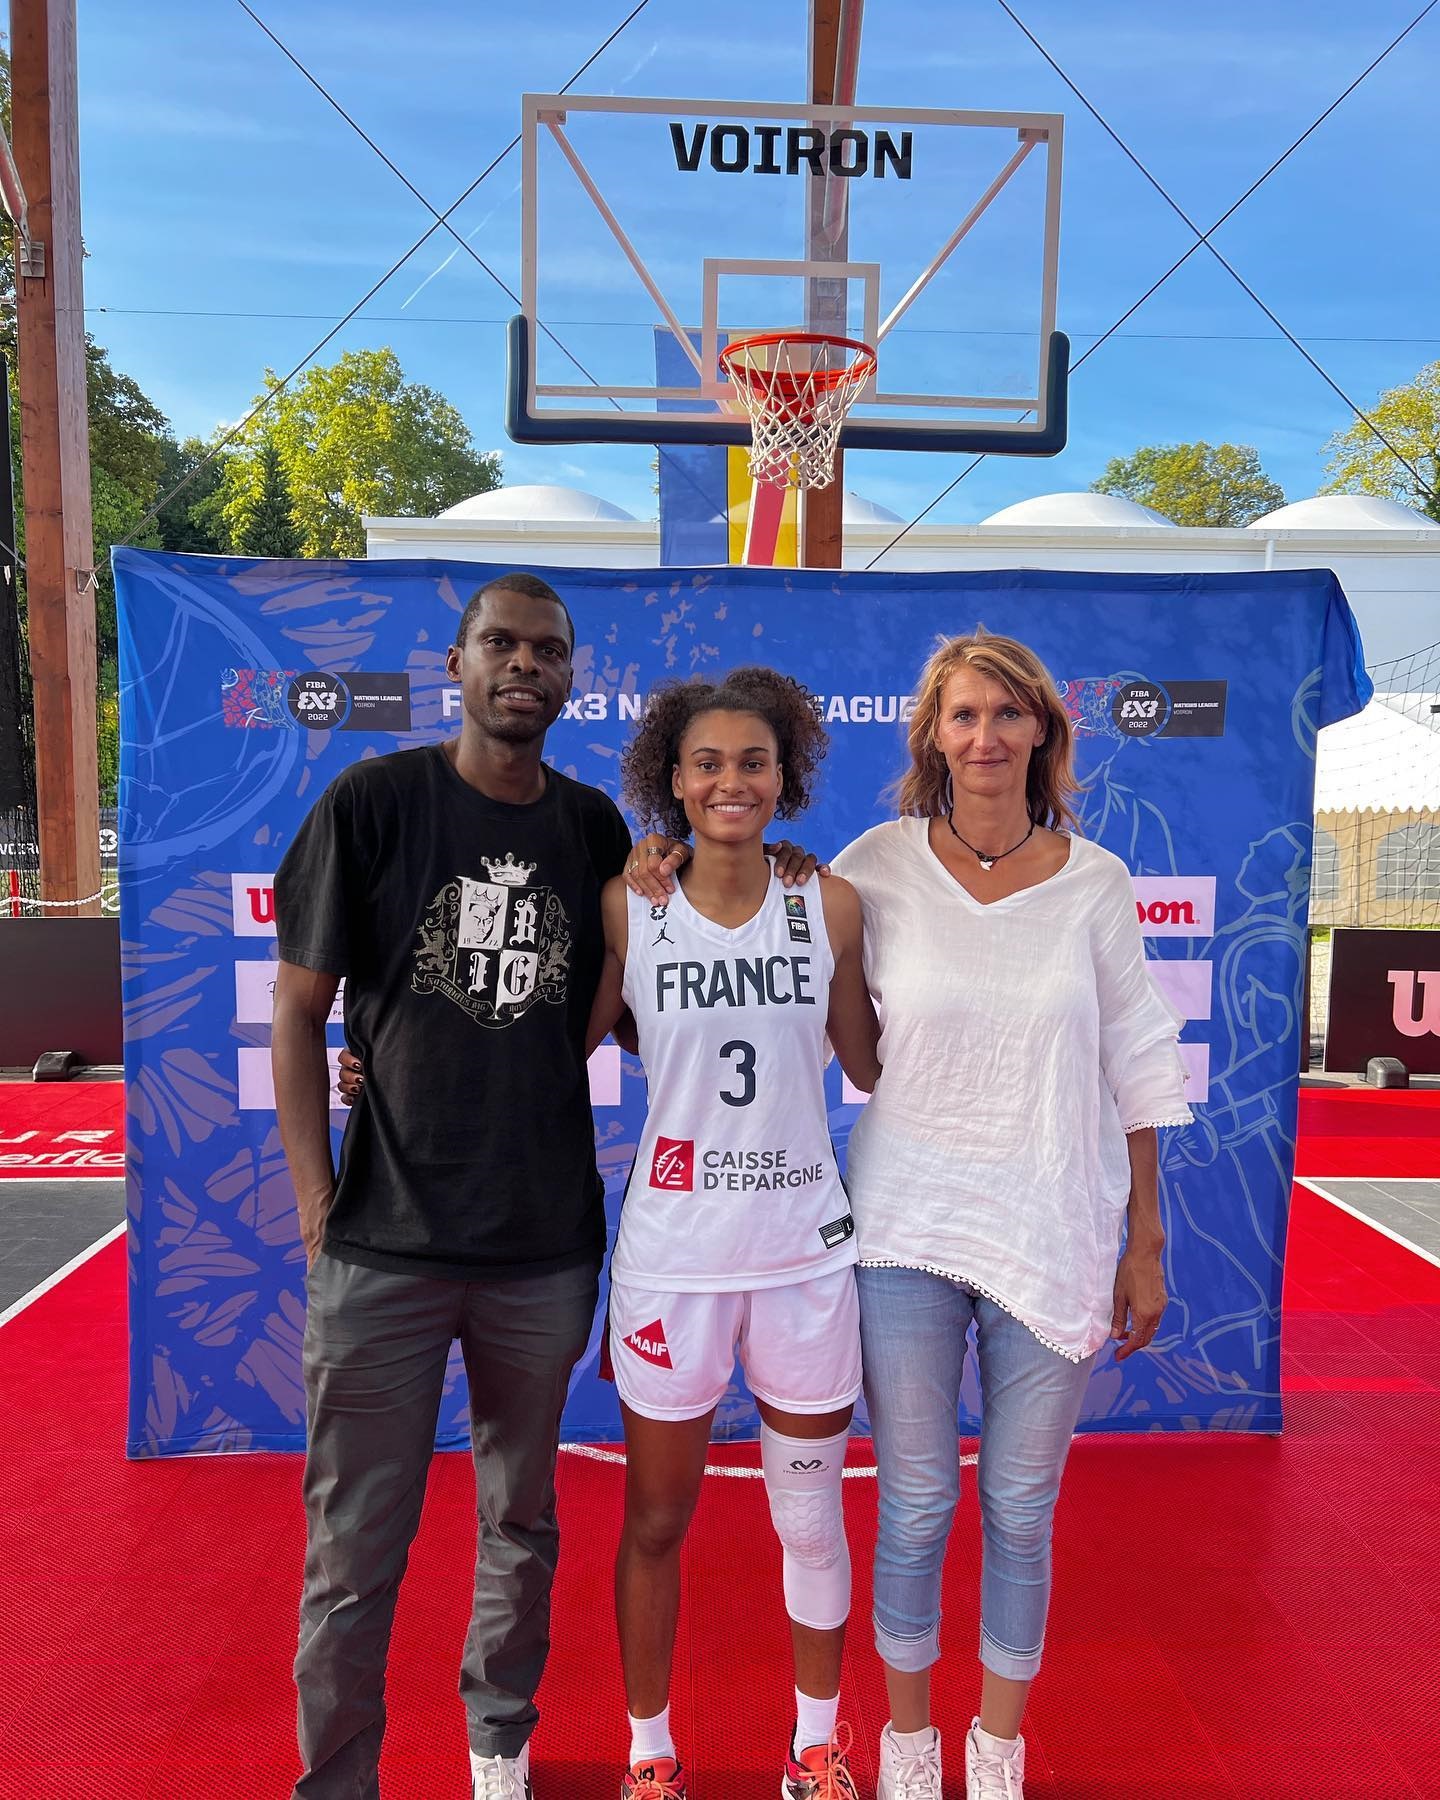 Eve has also represented France in 3x3 matches